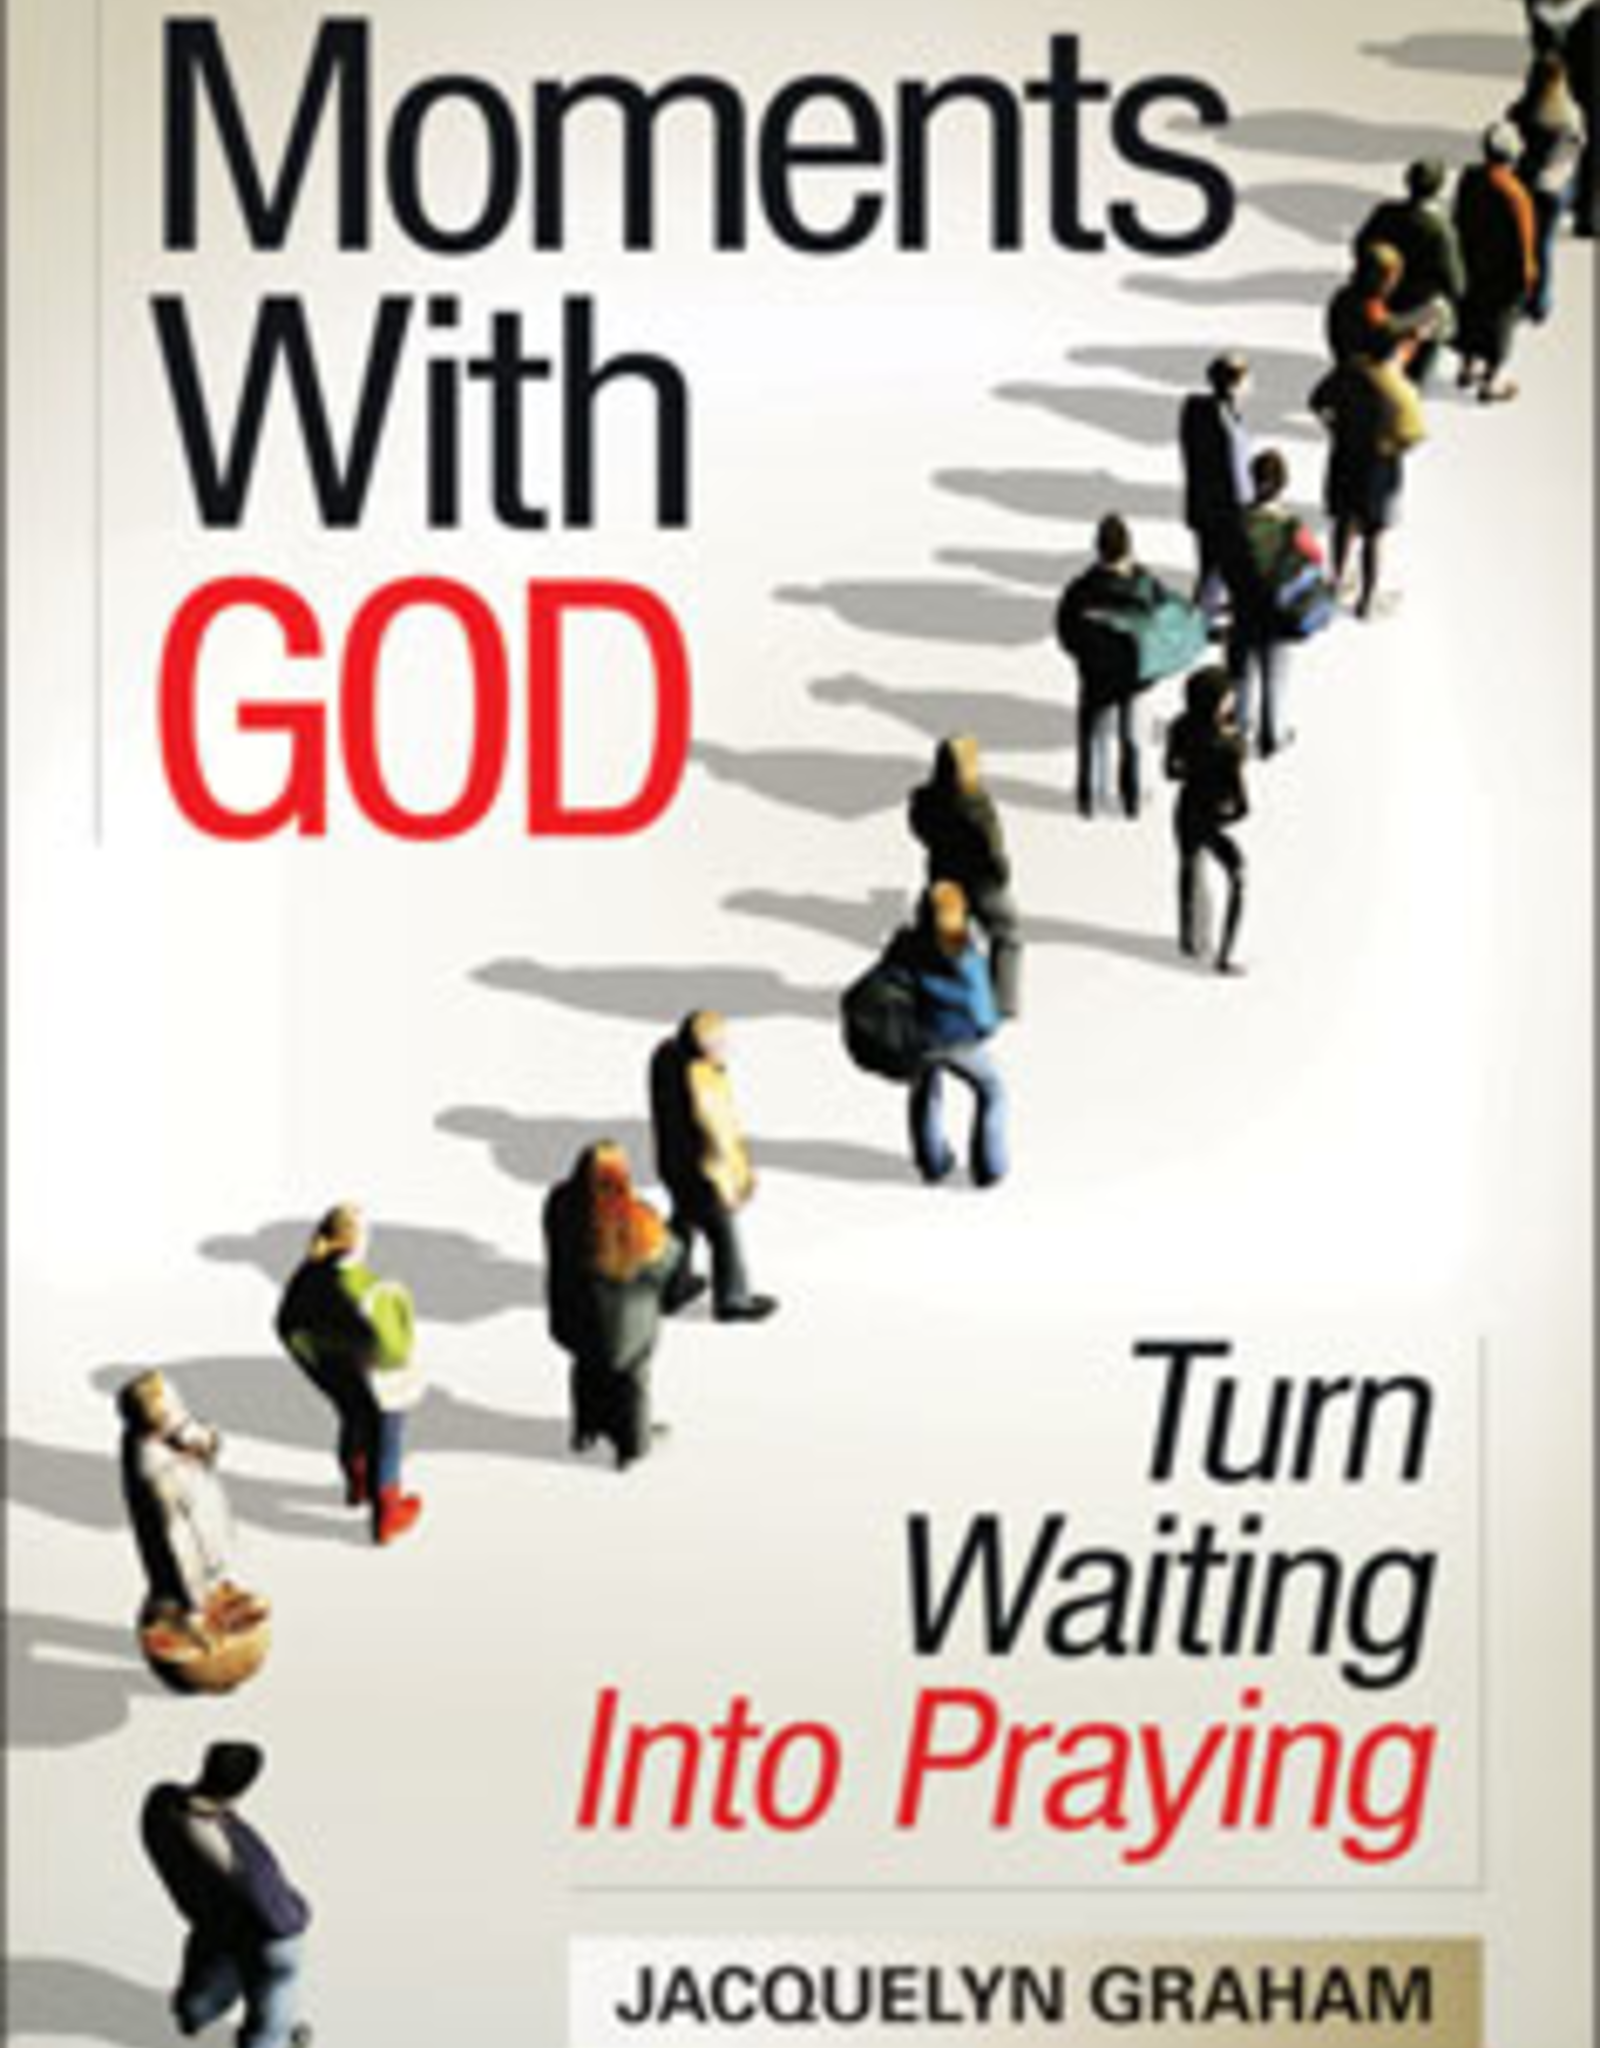 Liguori Press Moments with God: Turn Waiting into Praying, by Jacquelyn Graham